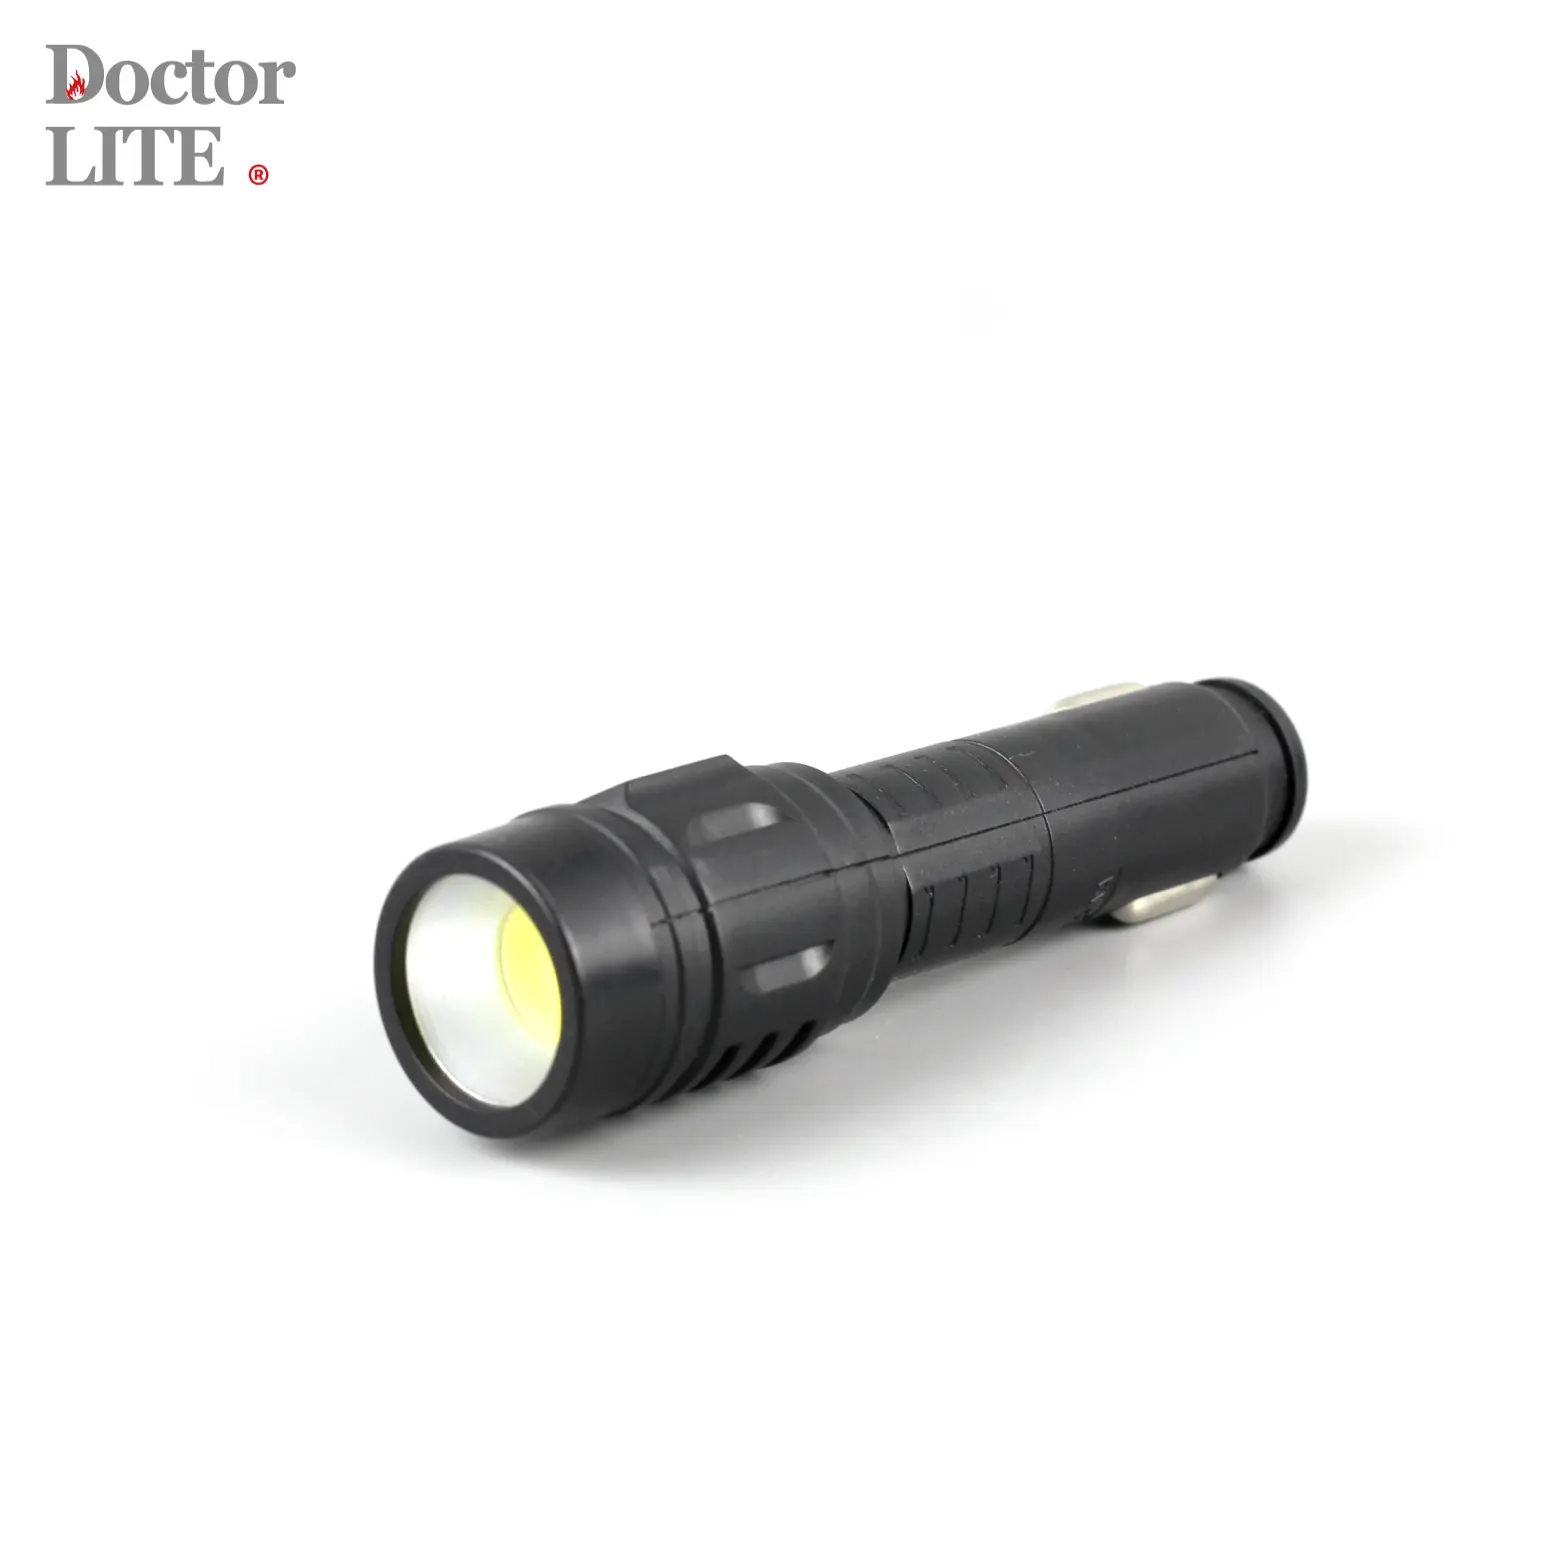 charging socket torch cigarette lighter with flashlight, mini car charger torch, car flashlight